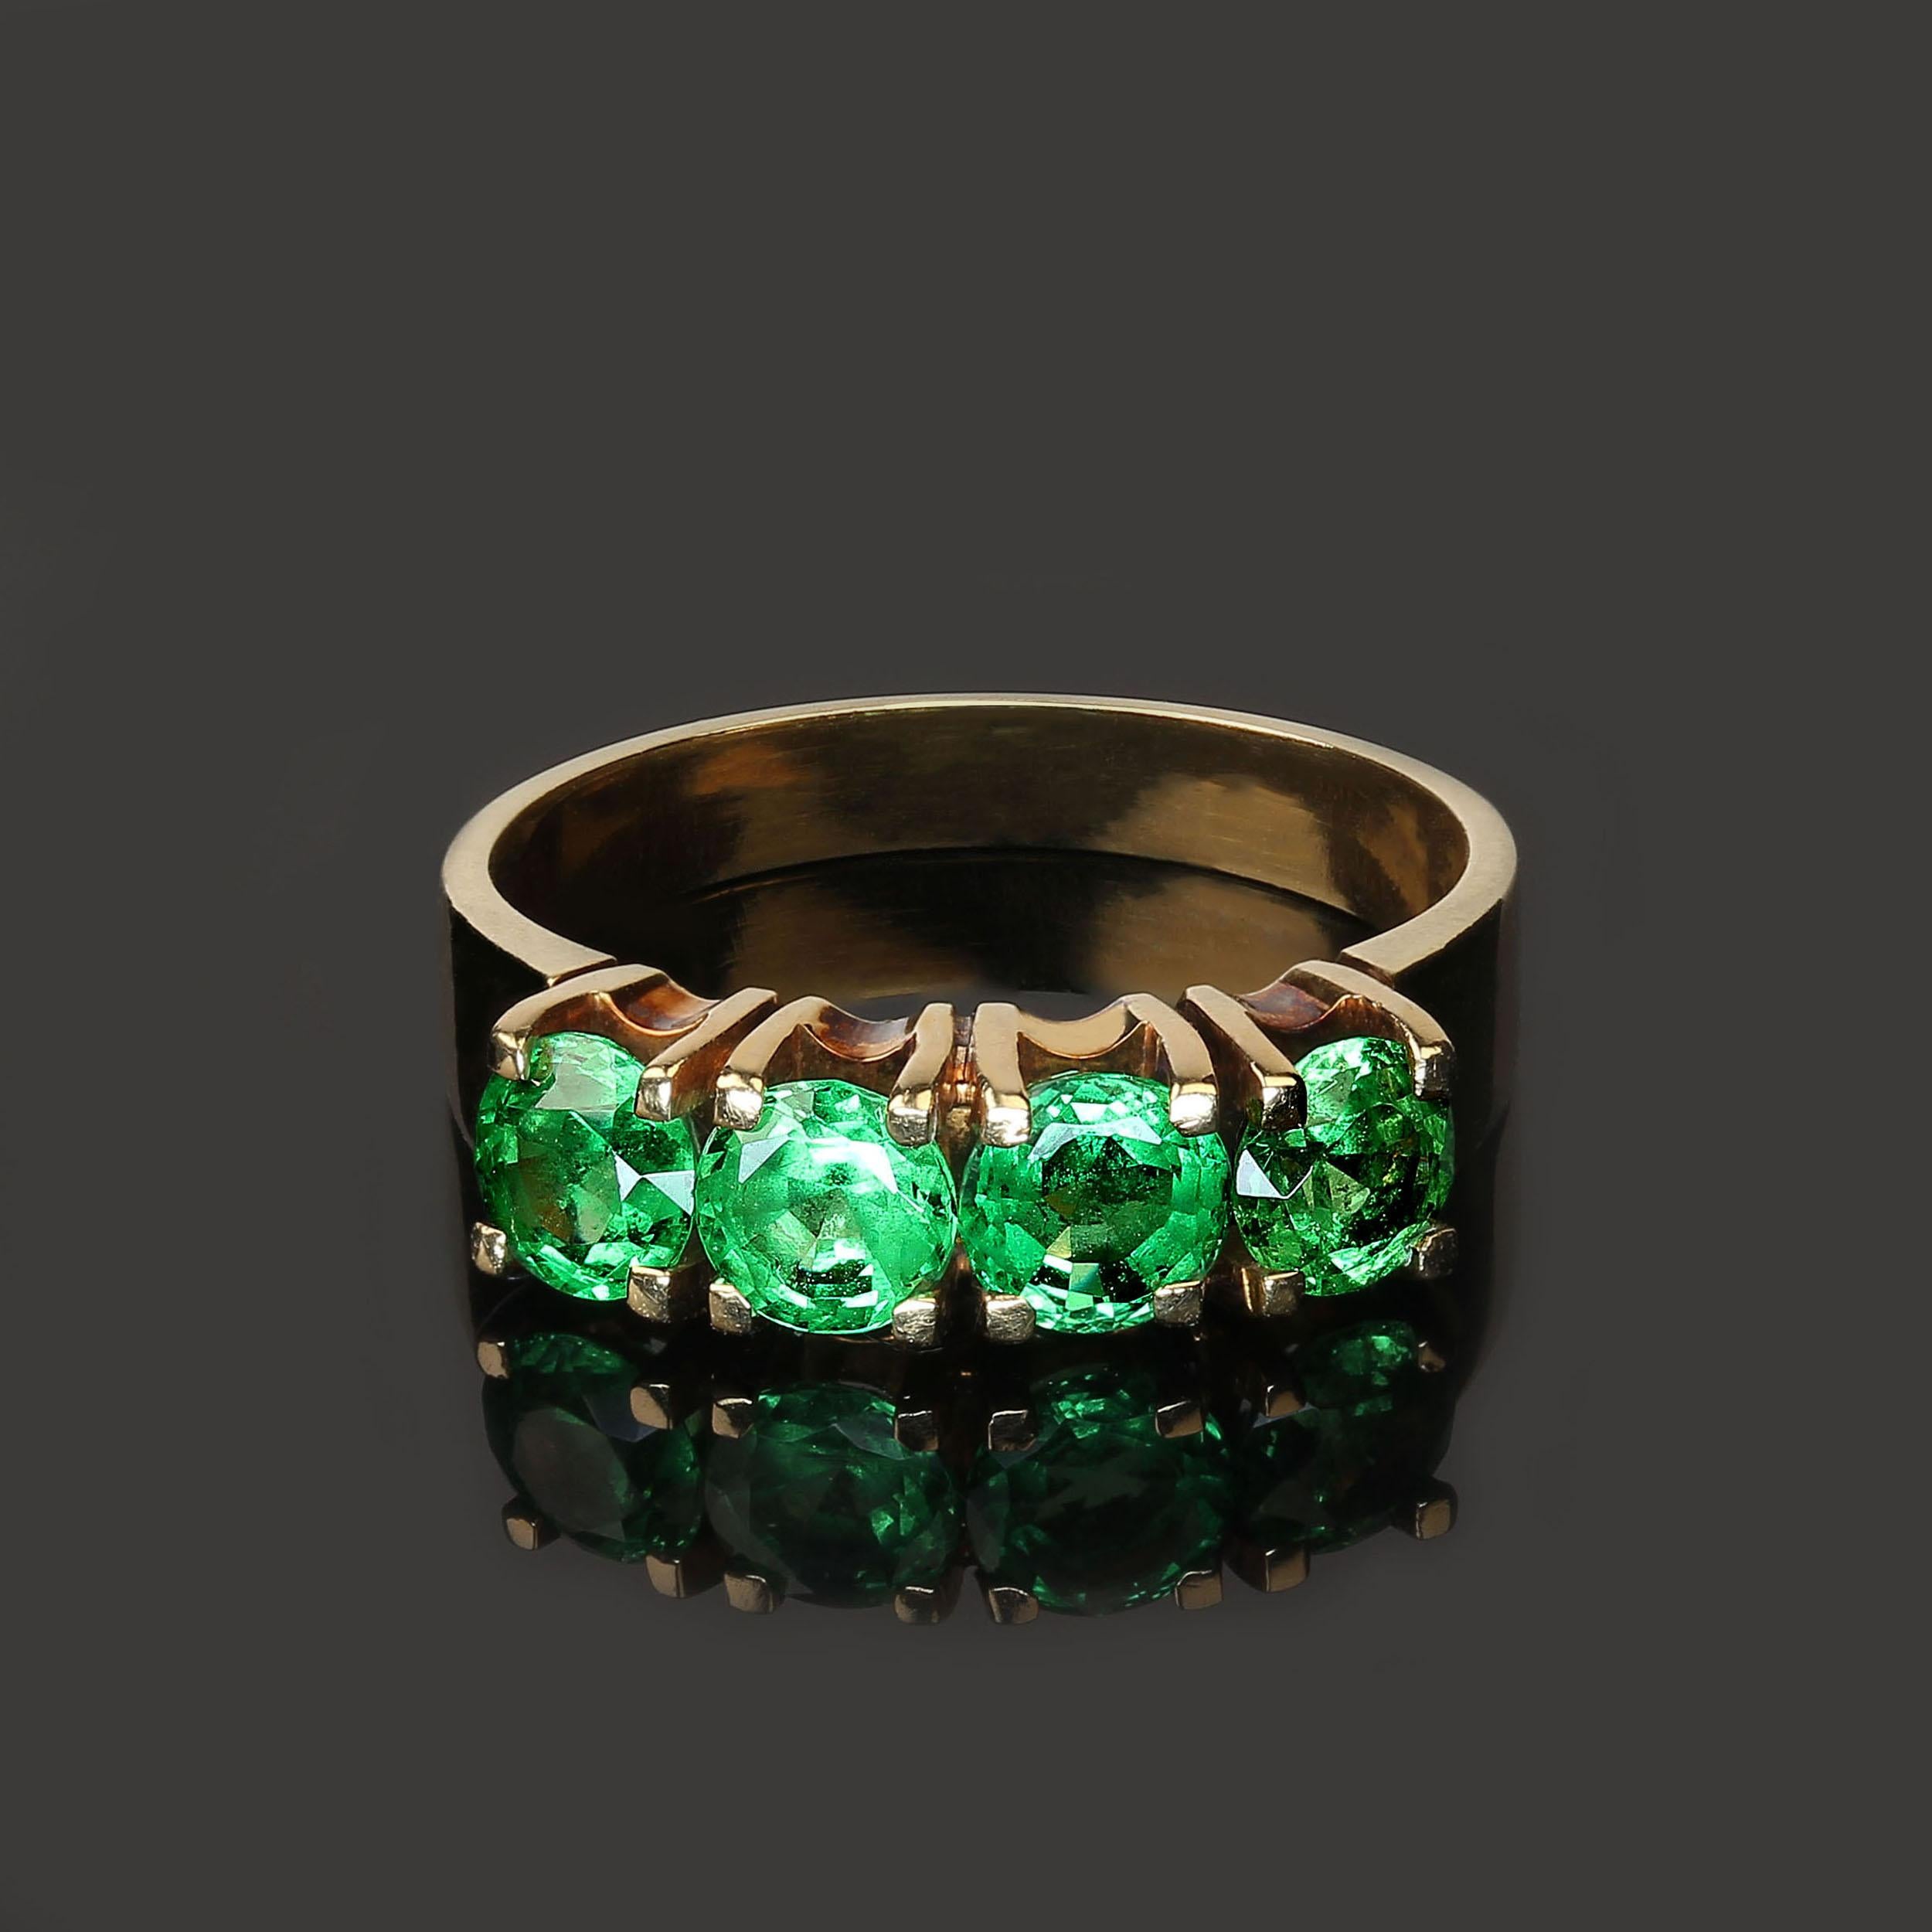 Enjoy brilliant green Tsavorite Garnets every day with this gorgeous band of gemstones.  These lovely gemstones are a brilliant green.  The four gemstones are 4.3-4.5 MM in size and with an estimated weight of 1.40 ctw.  This ring  features garnets